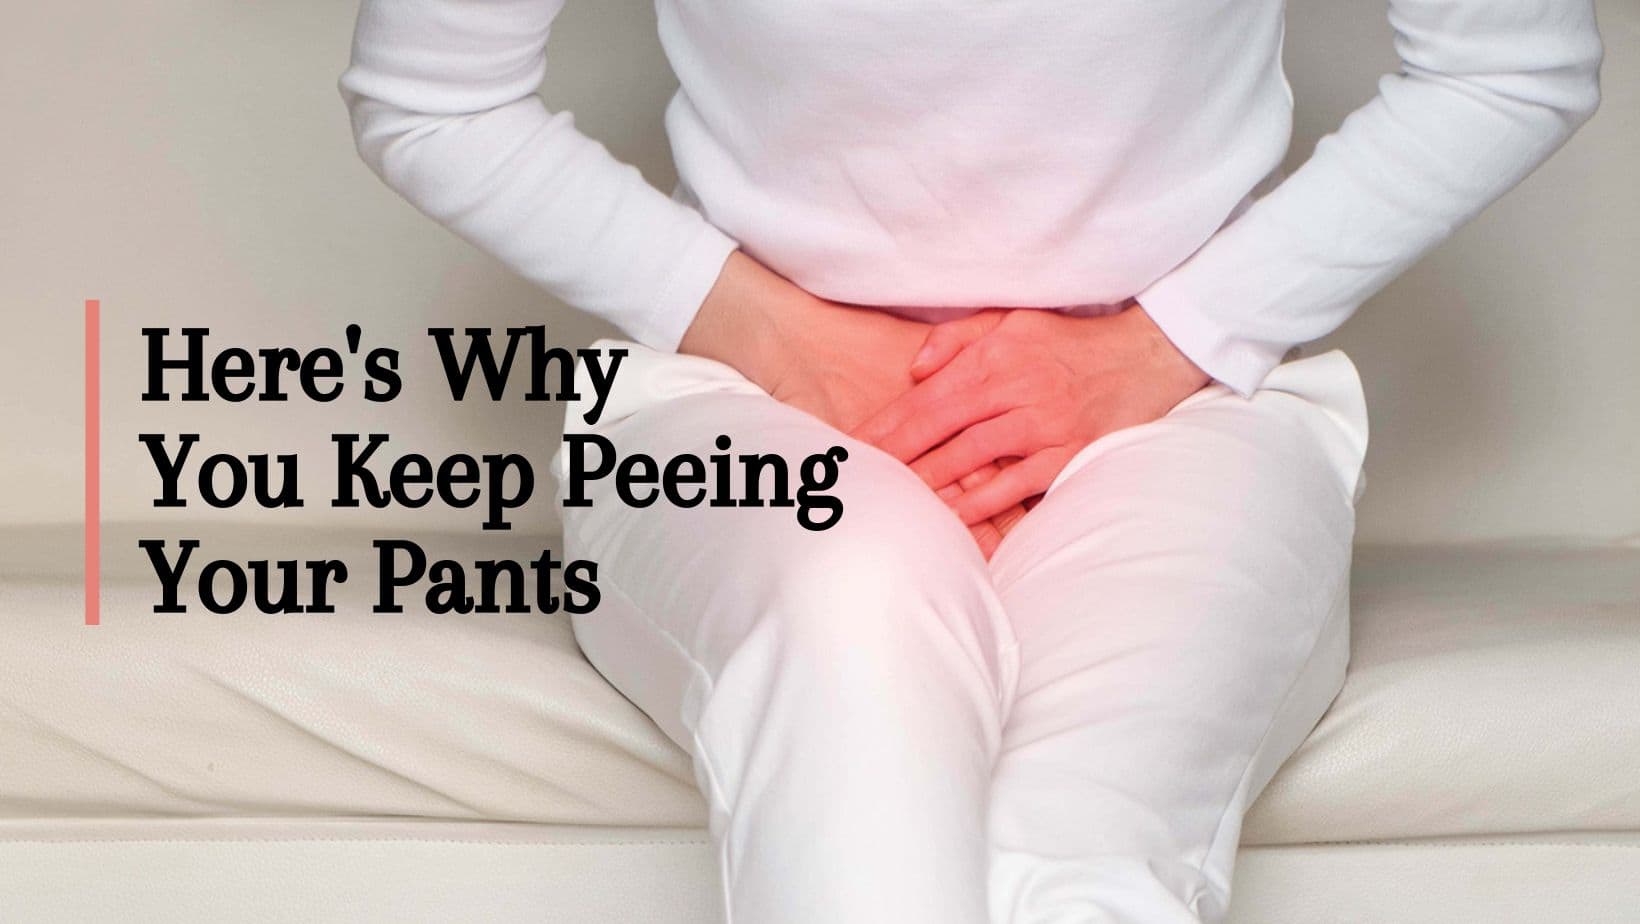 I Am Peeing In My Pants Without Realising Is It a Bladder Infection? TheHealthSite image picture